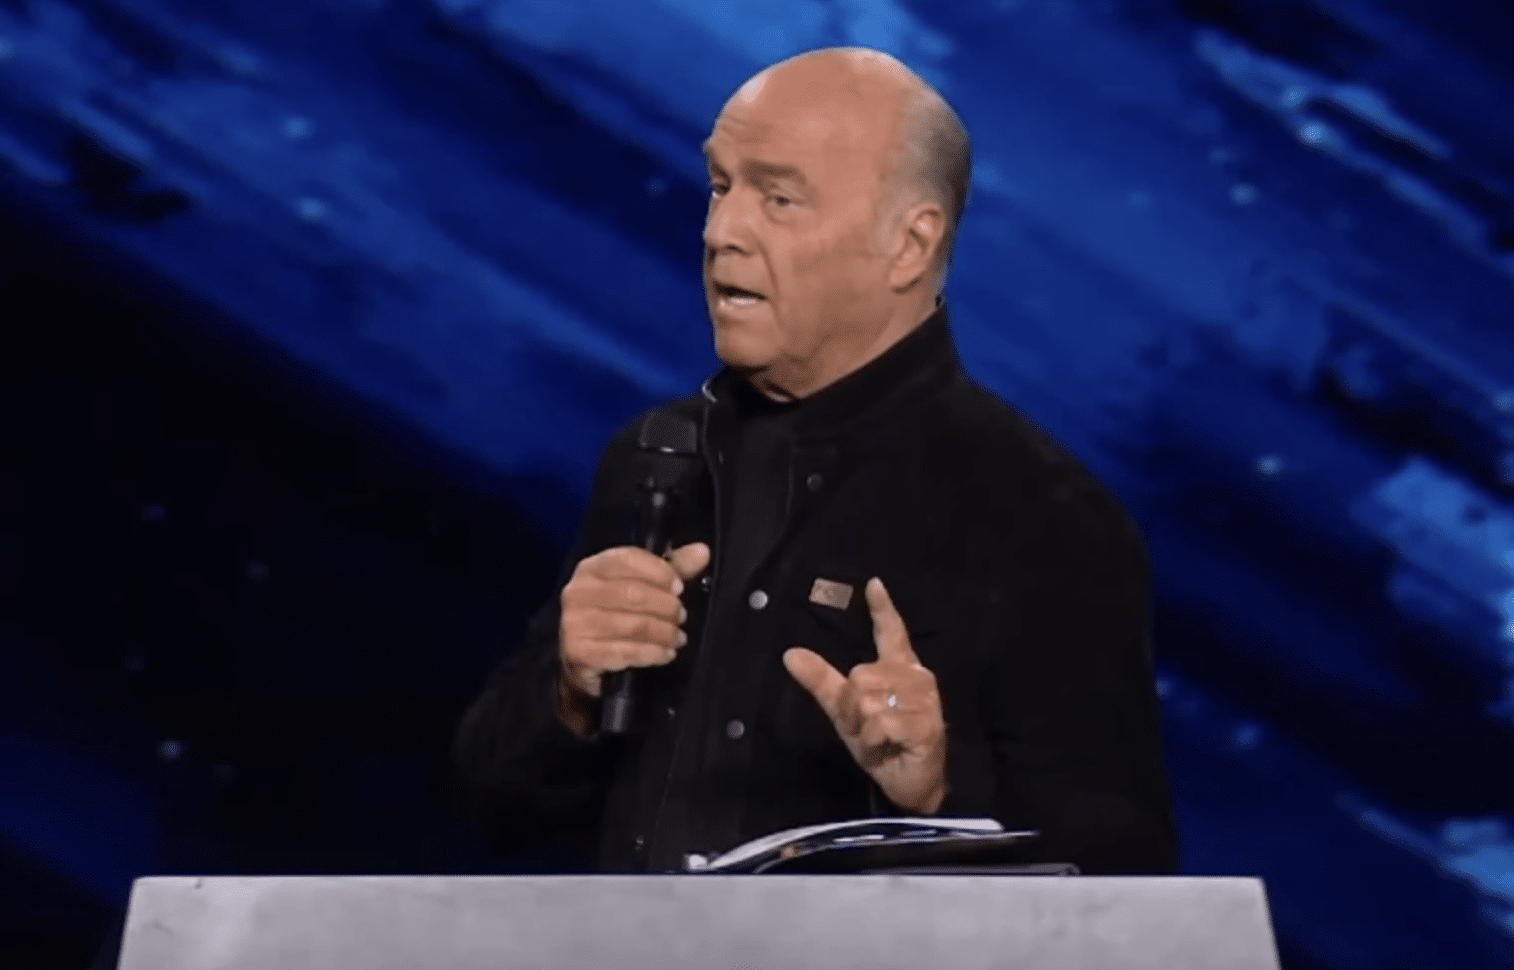 Greg Laurie lists 4 ways Christians will live as ‘last days believers’ in the End Times